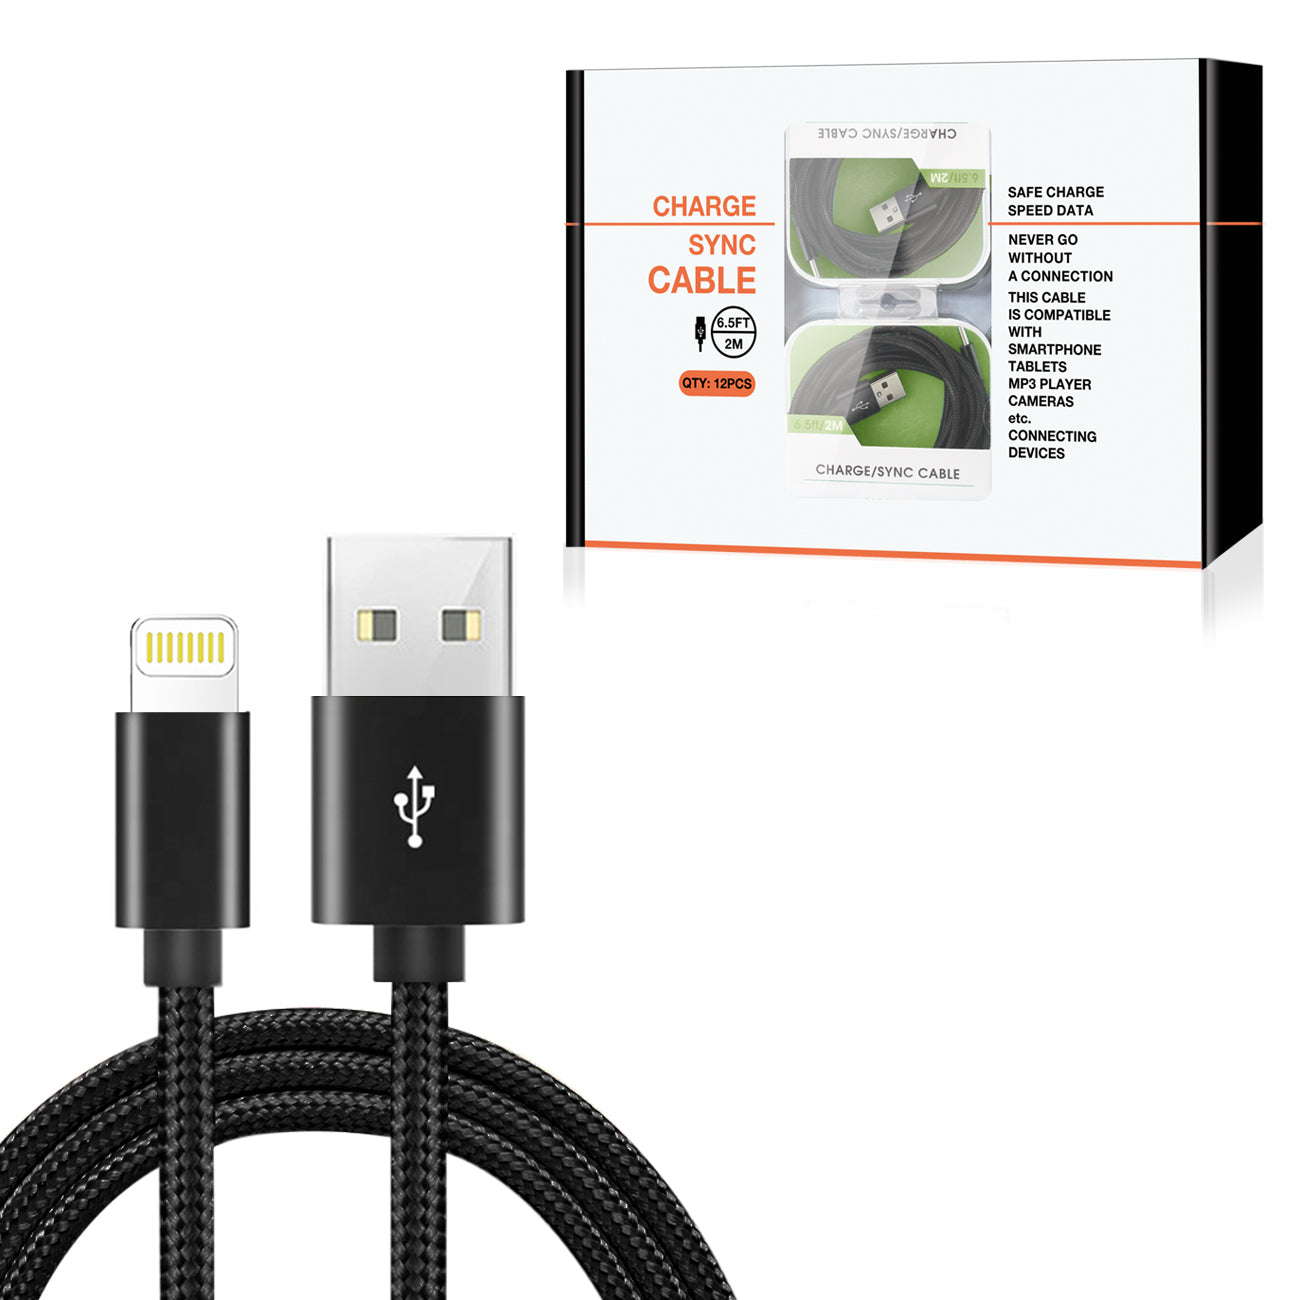 8-PIN Fast Charge/Sync Cable 6.5 ft In Black (12pcs)